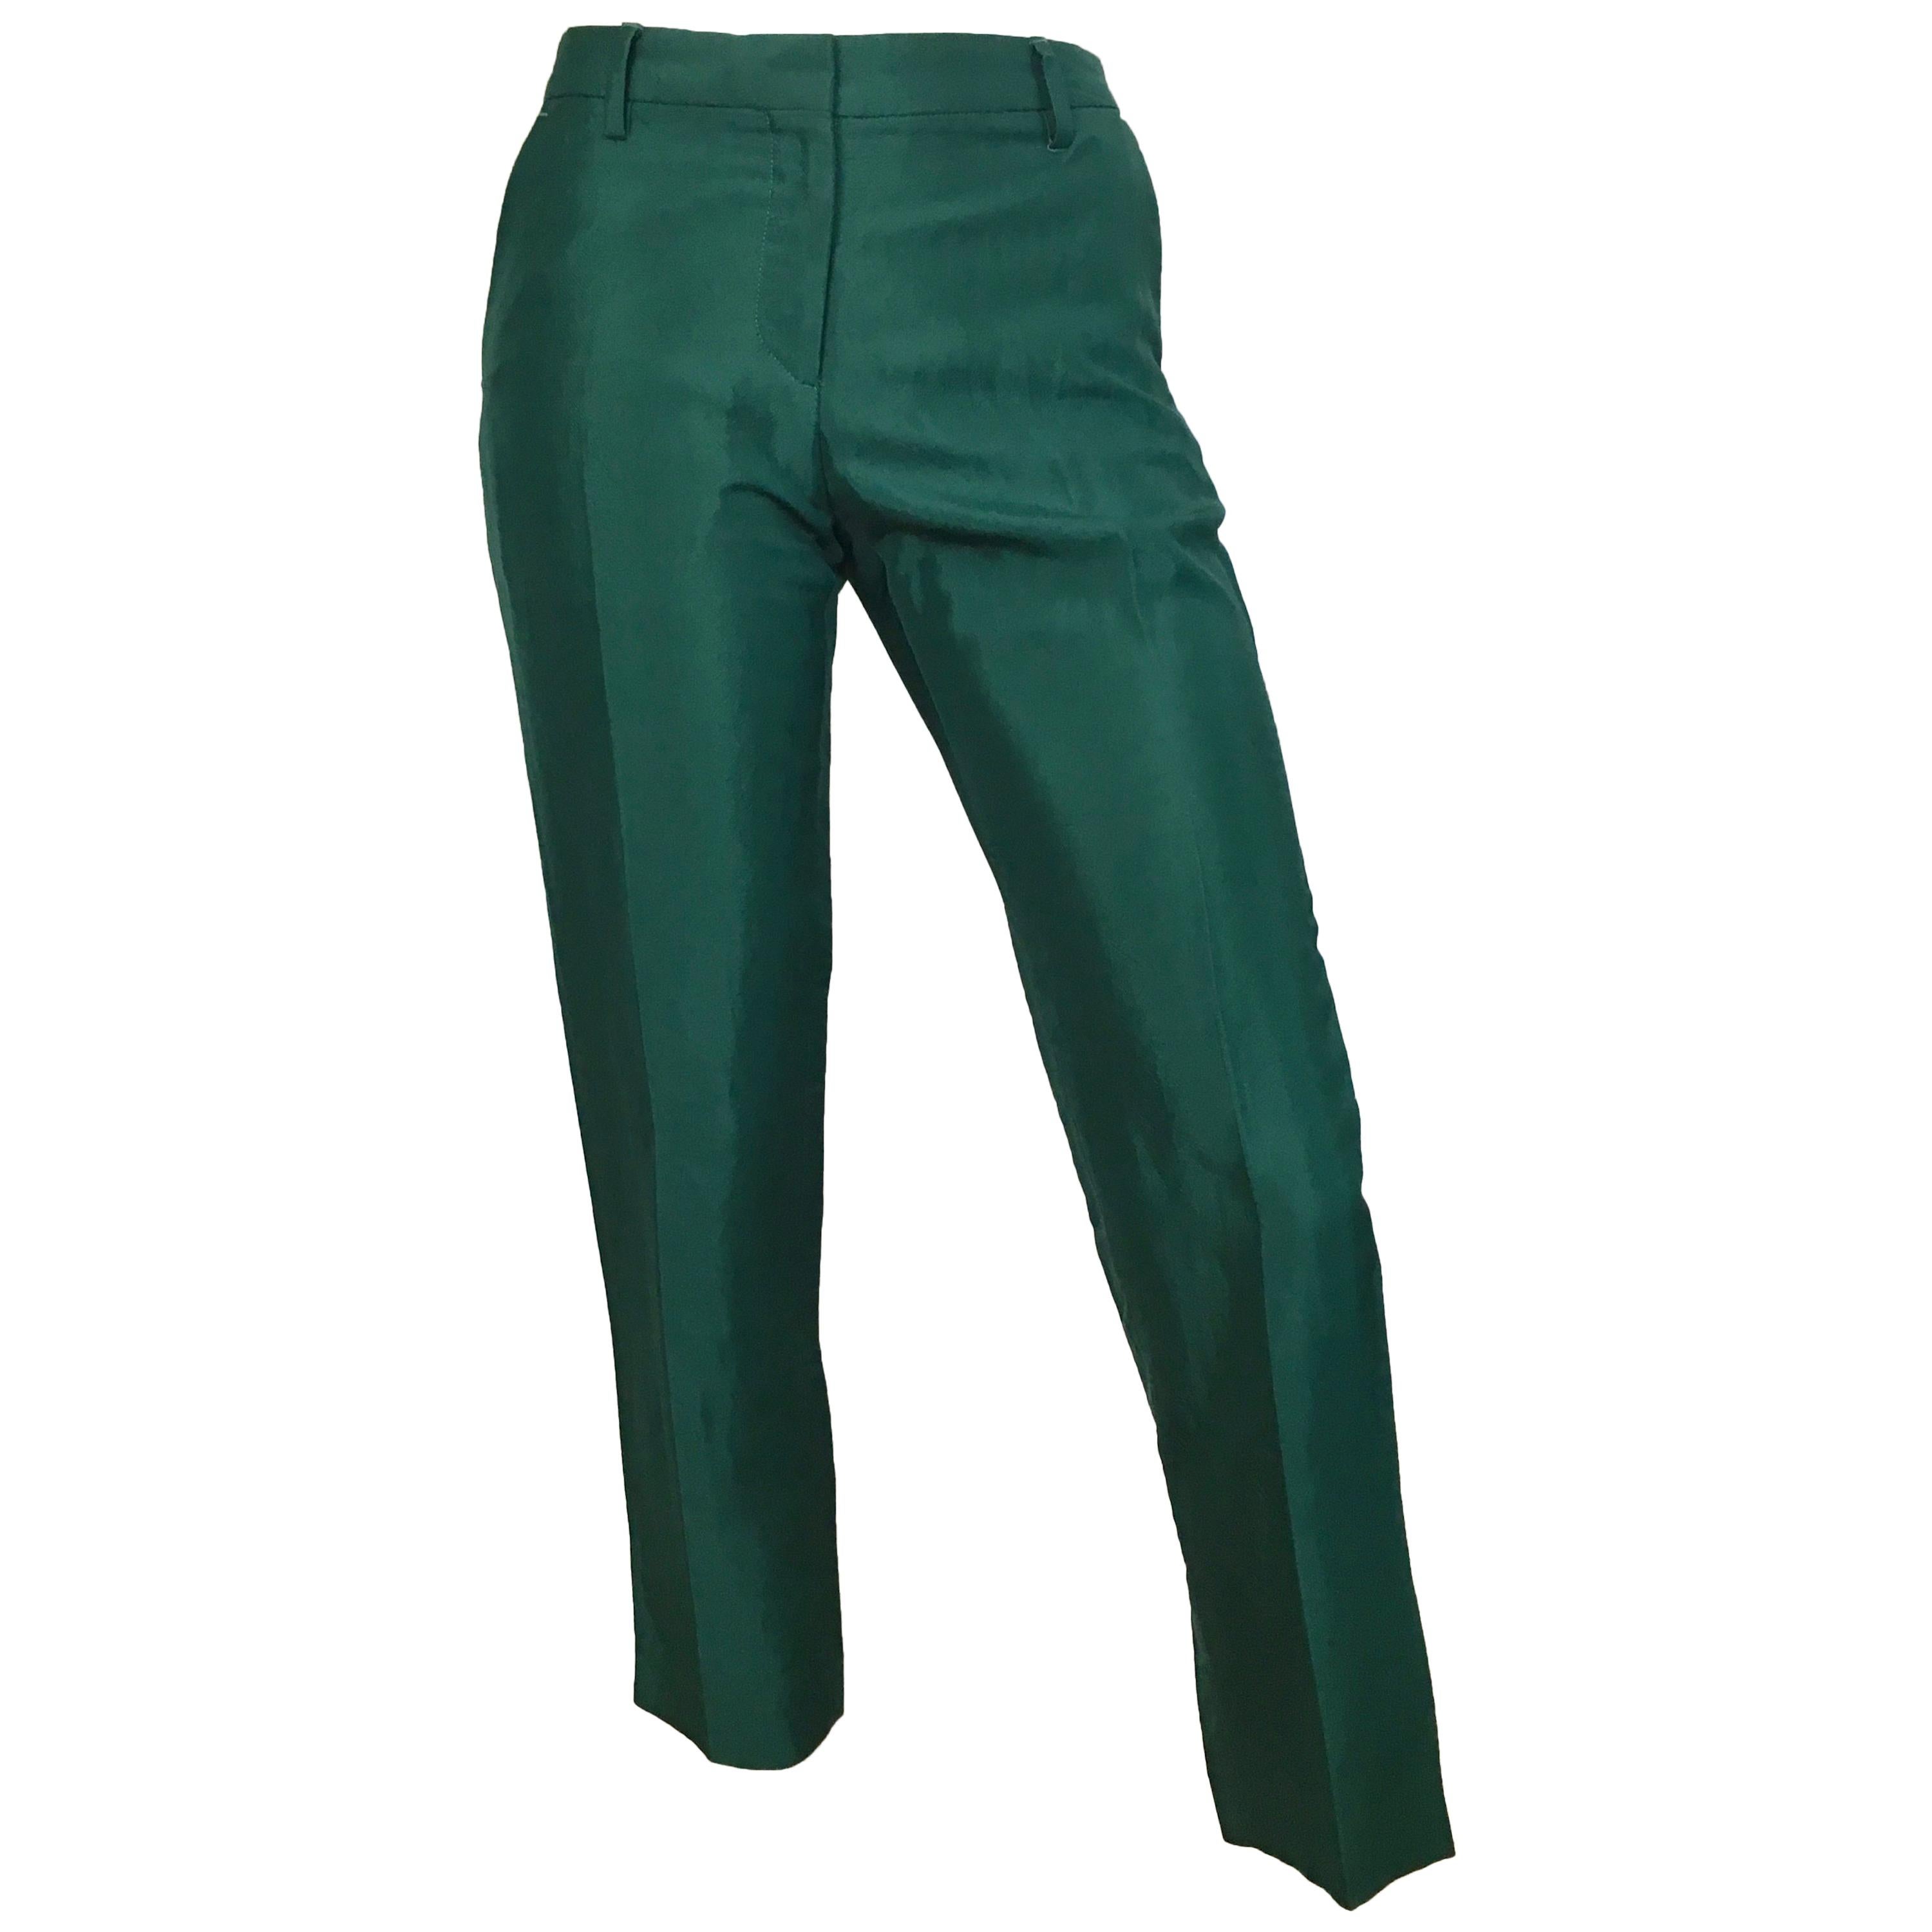 Dries Van Noten Green Dress Pants with Pockets Size 4 / 34. For Sale